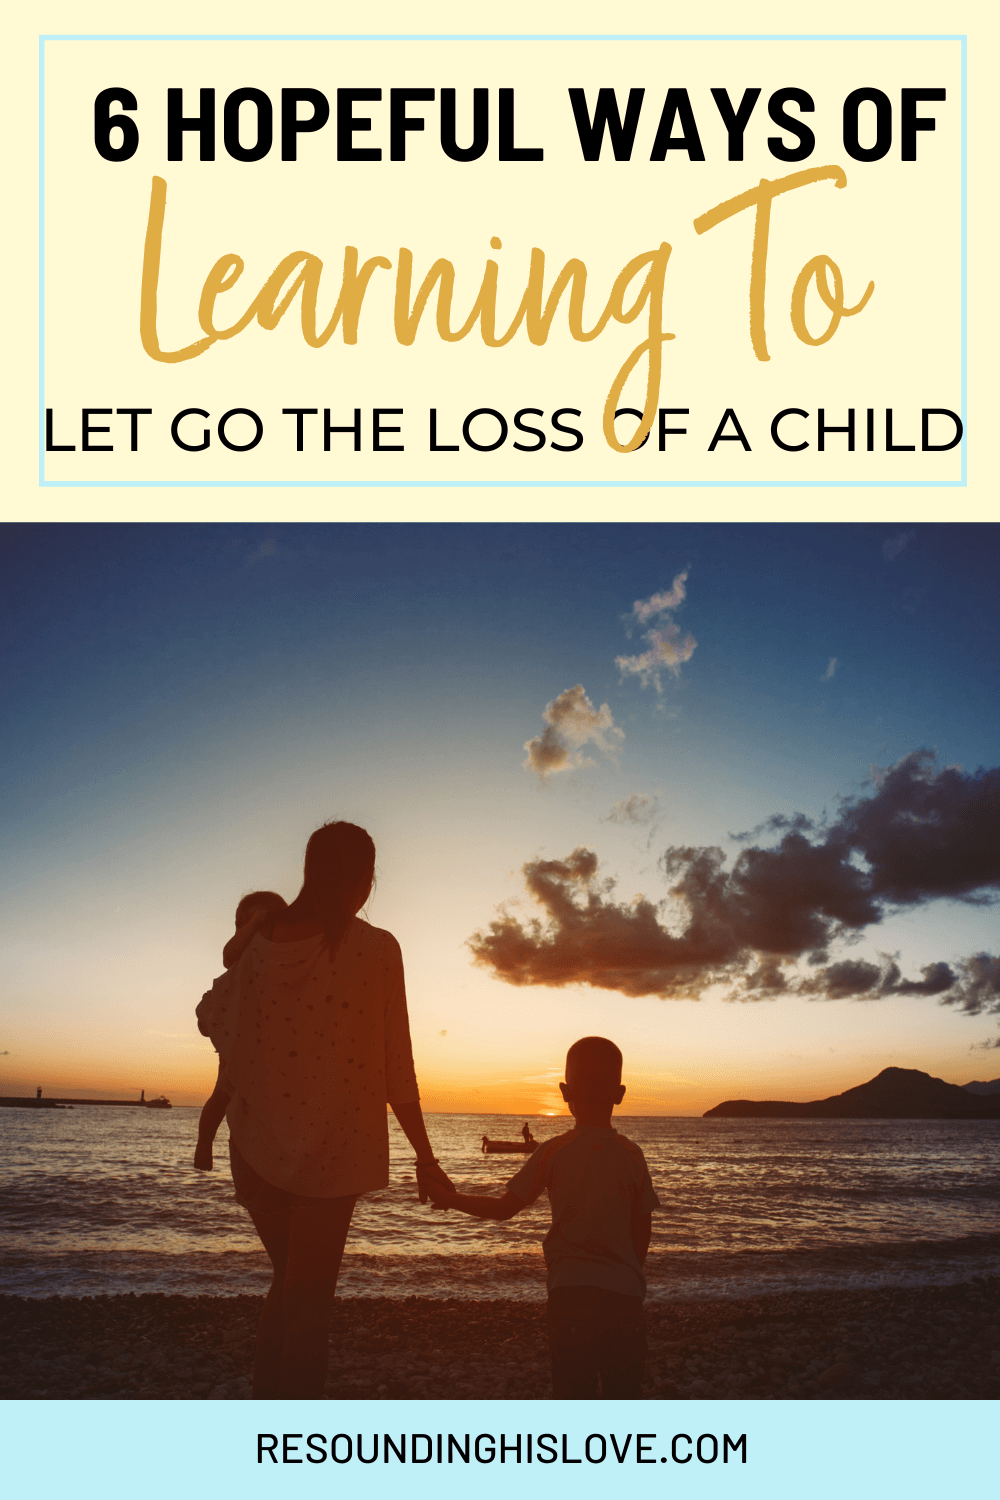 a mother holding the hand of a small child while carrying another on the beach at sunset with text 6 Hopeful Ways of Learning To Let Go of the Loss of a Child